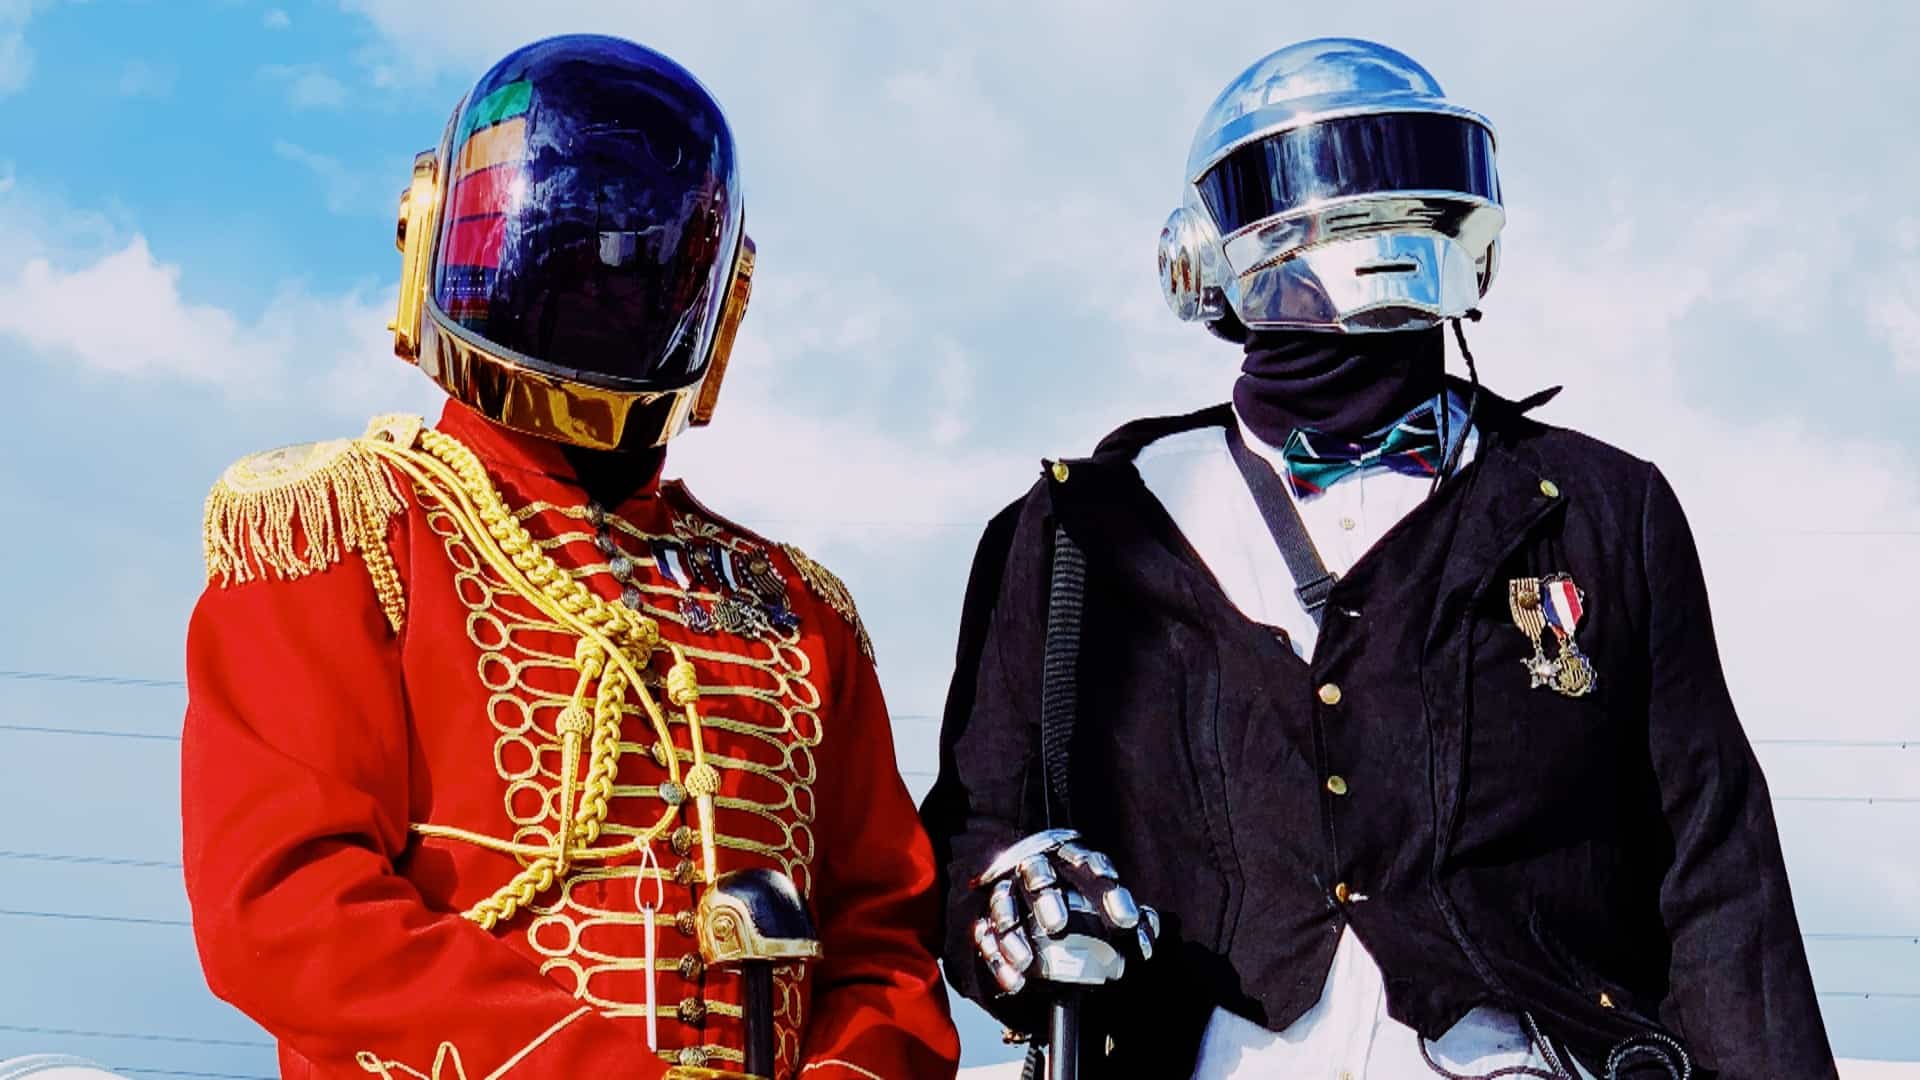 The Weeknd & Daft Punk’s music video for ‘I Feel It Coming’ passes 1 billion views